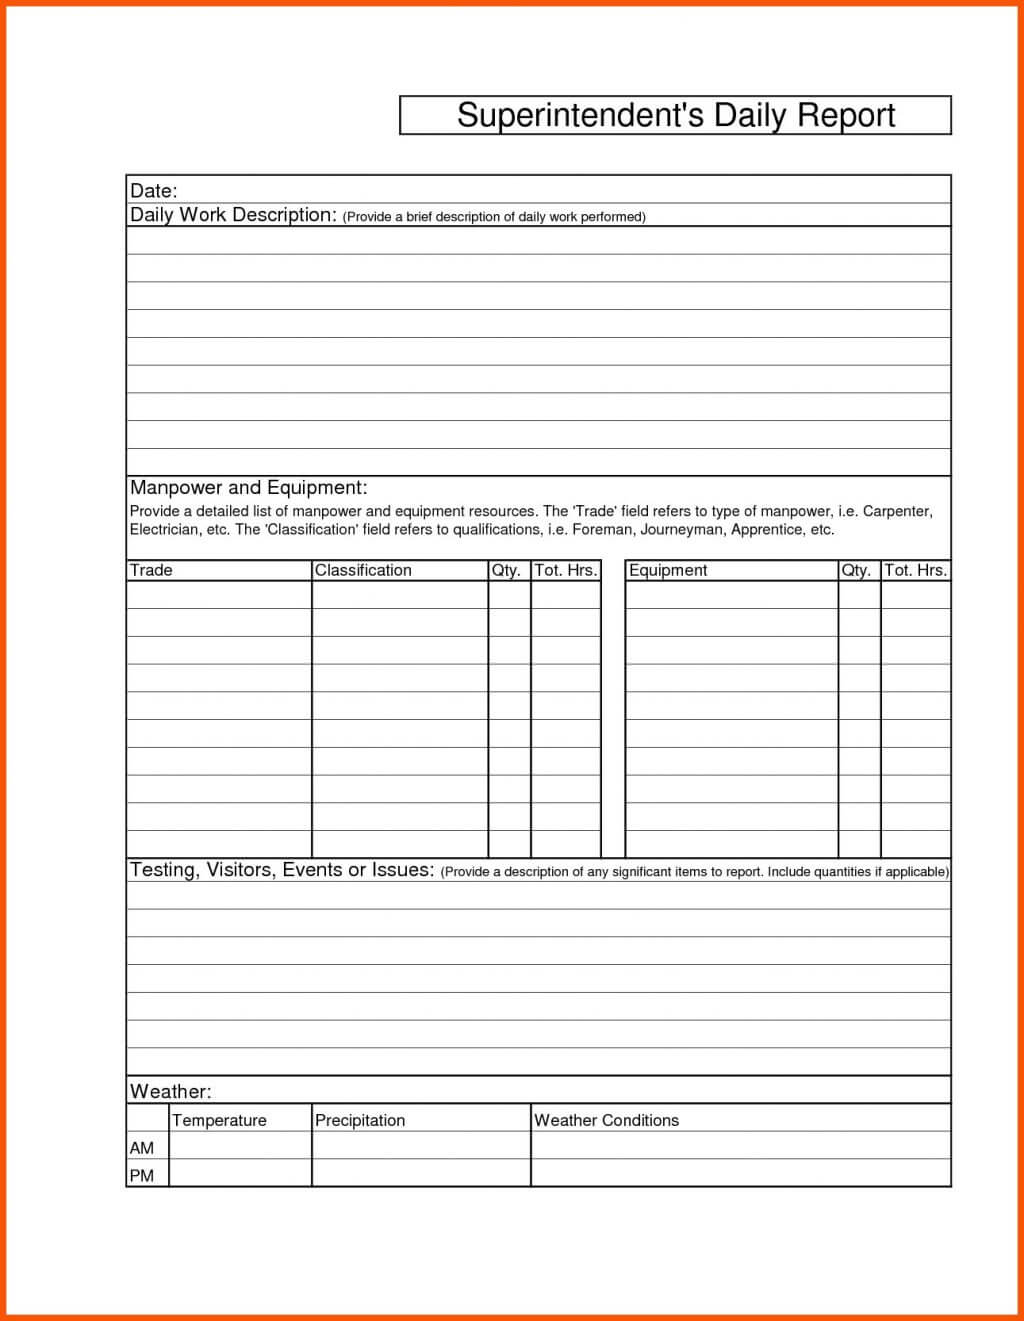 Daily Work Report Mail Format For Employees Manpower Throughout Employee Daily Report Template